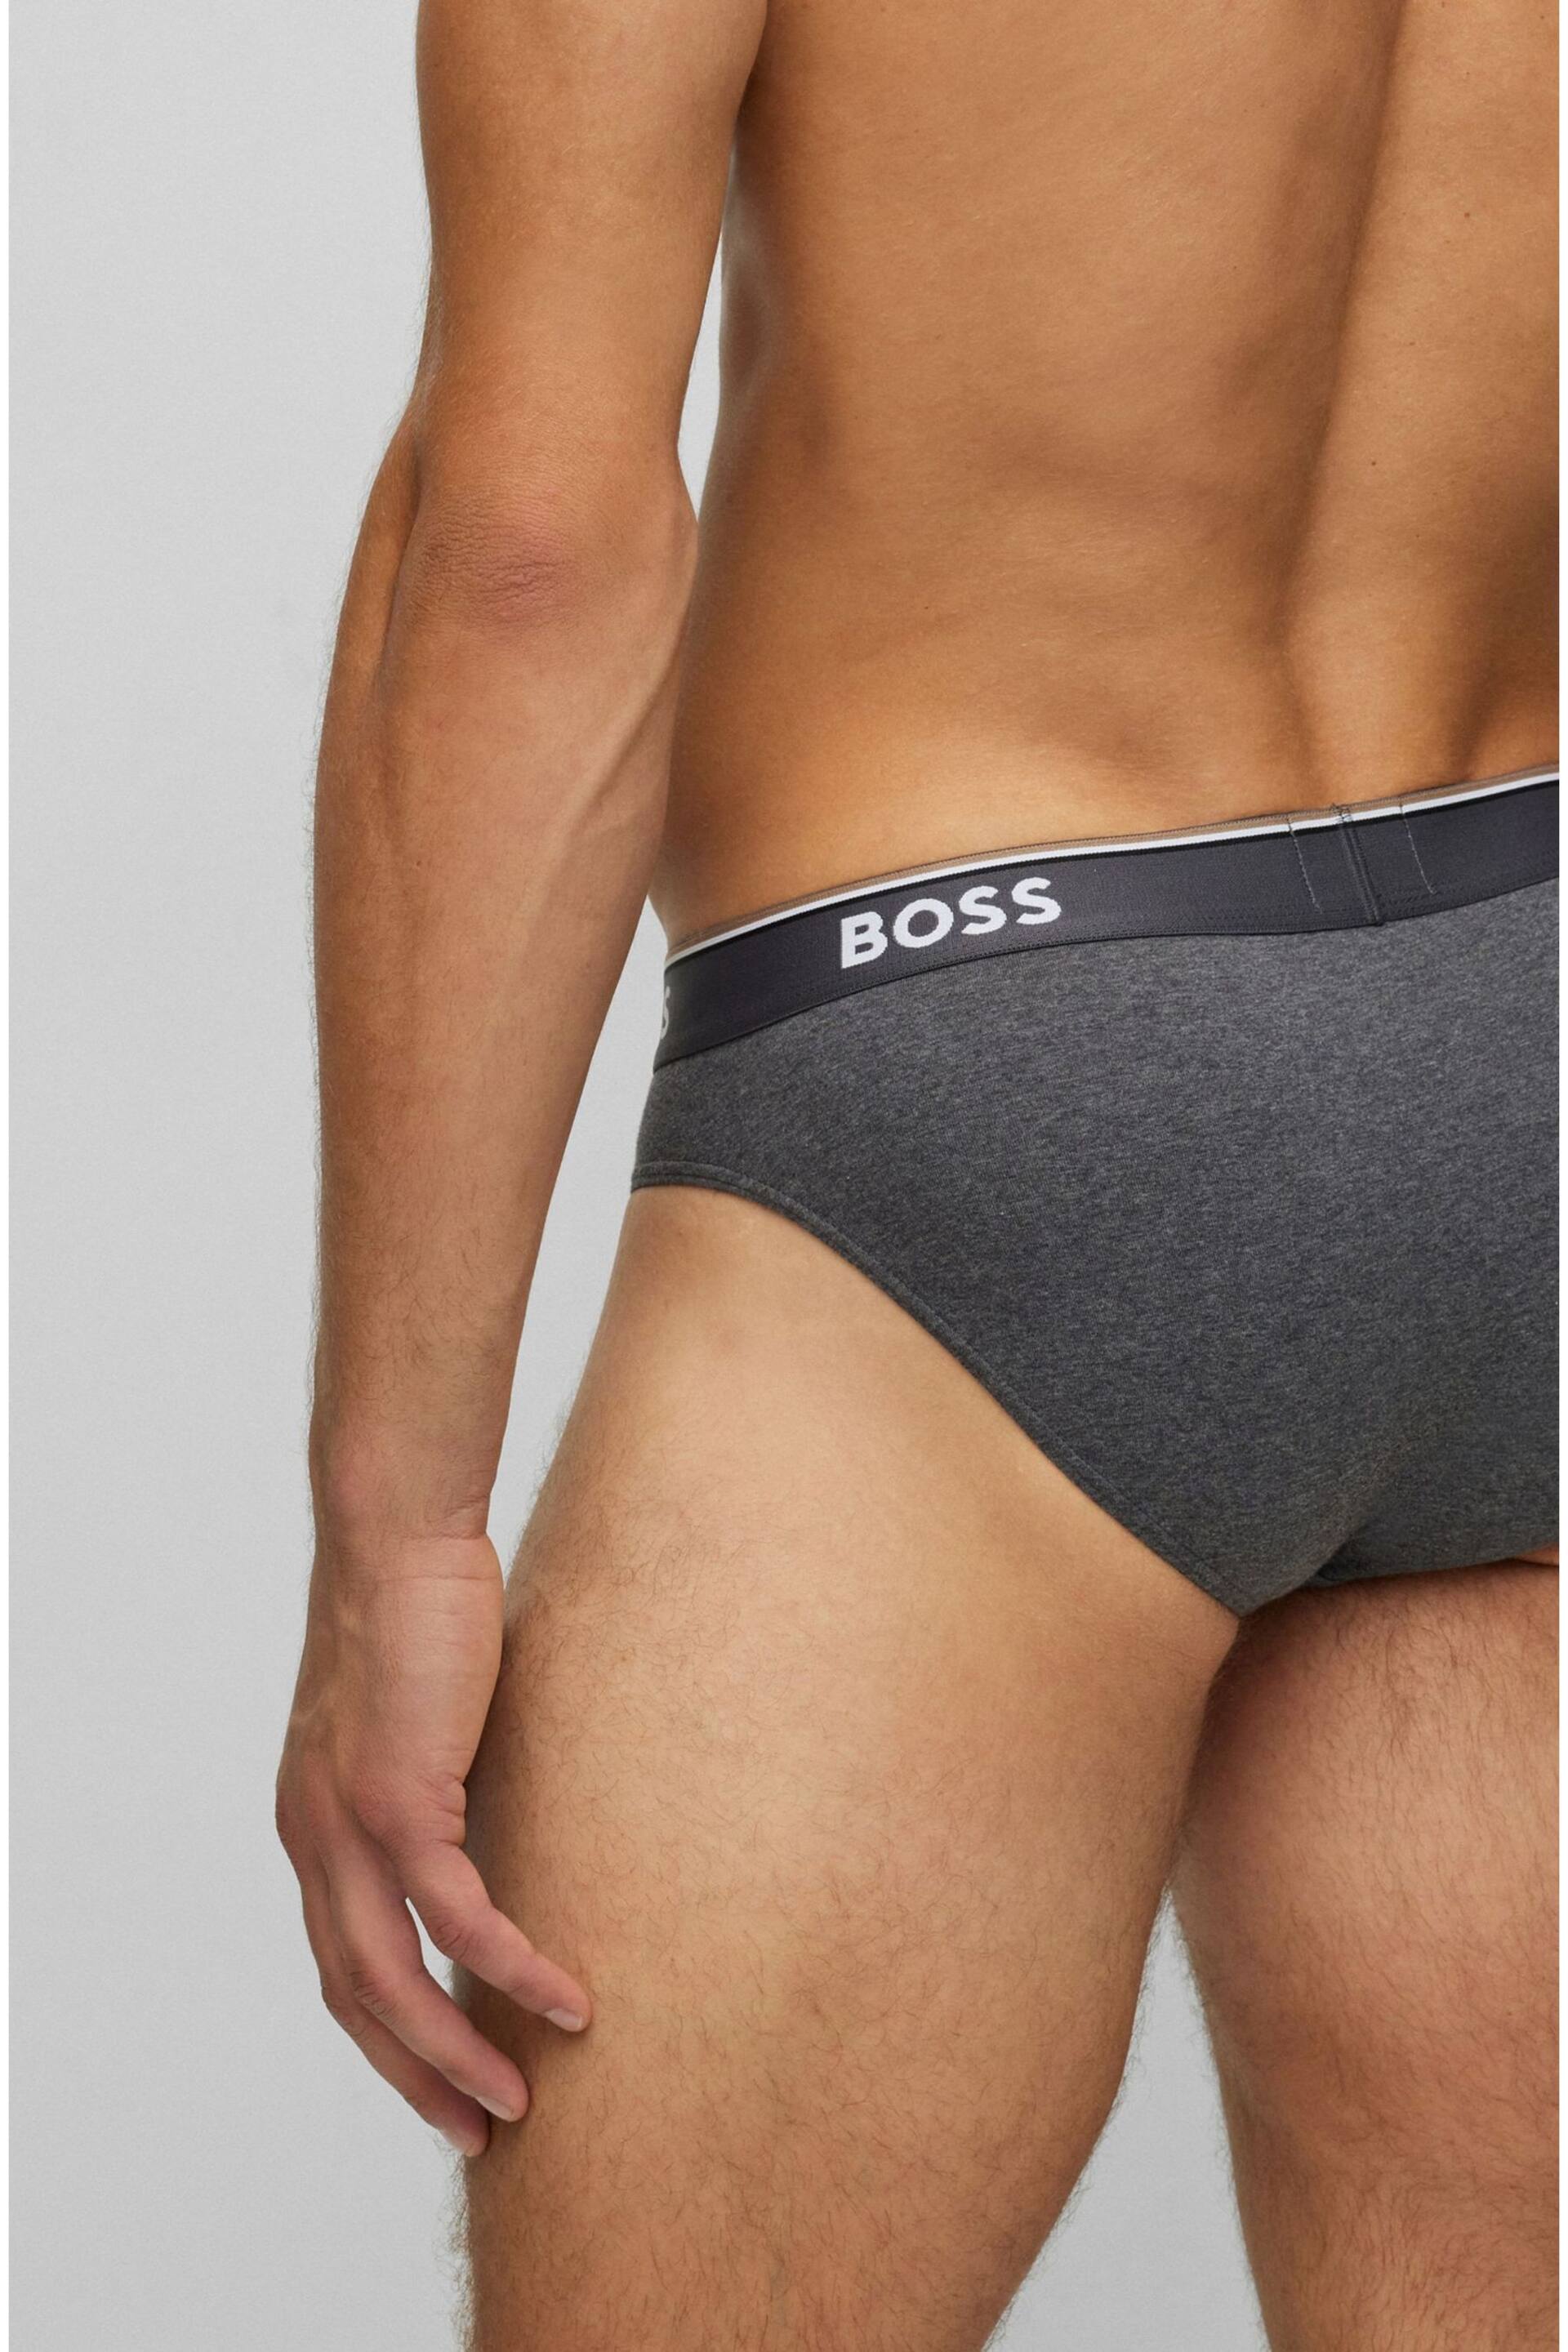 BOSS Grey Power Briefs 3 Pack - Image 9 of 9